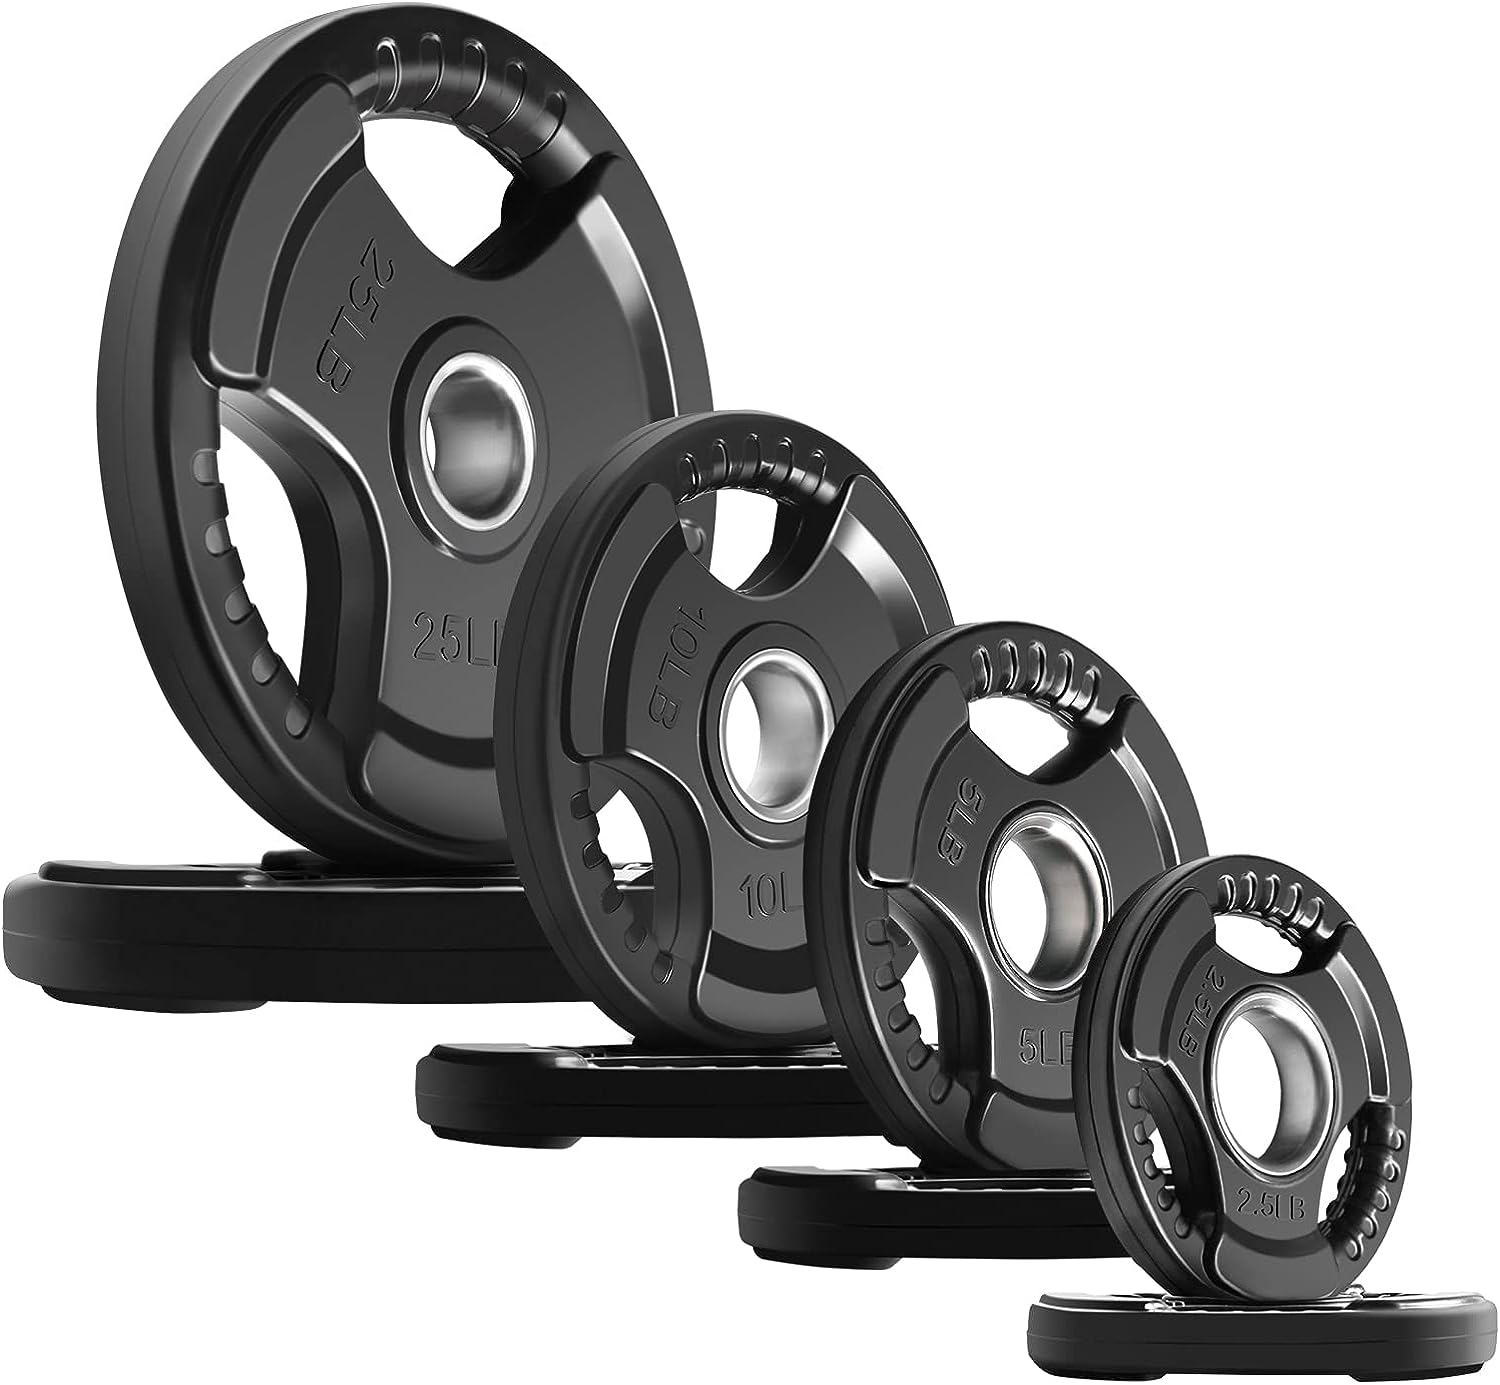 RitFit Olympic Rubber Grip Barbell Weight Plates 85lb Set $169.99 at Amazon (reg. $299.45!)